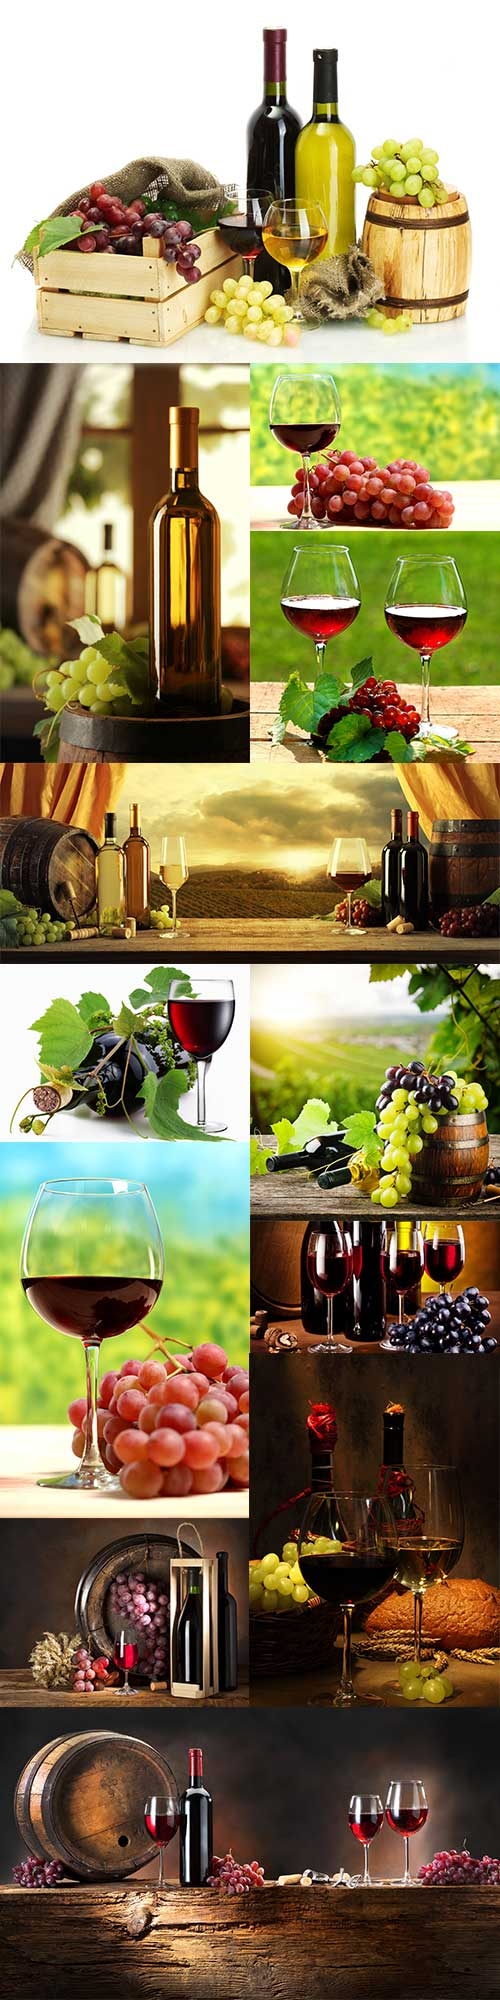 Wine and grapes stock photos